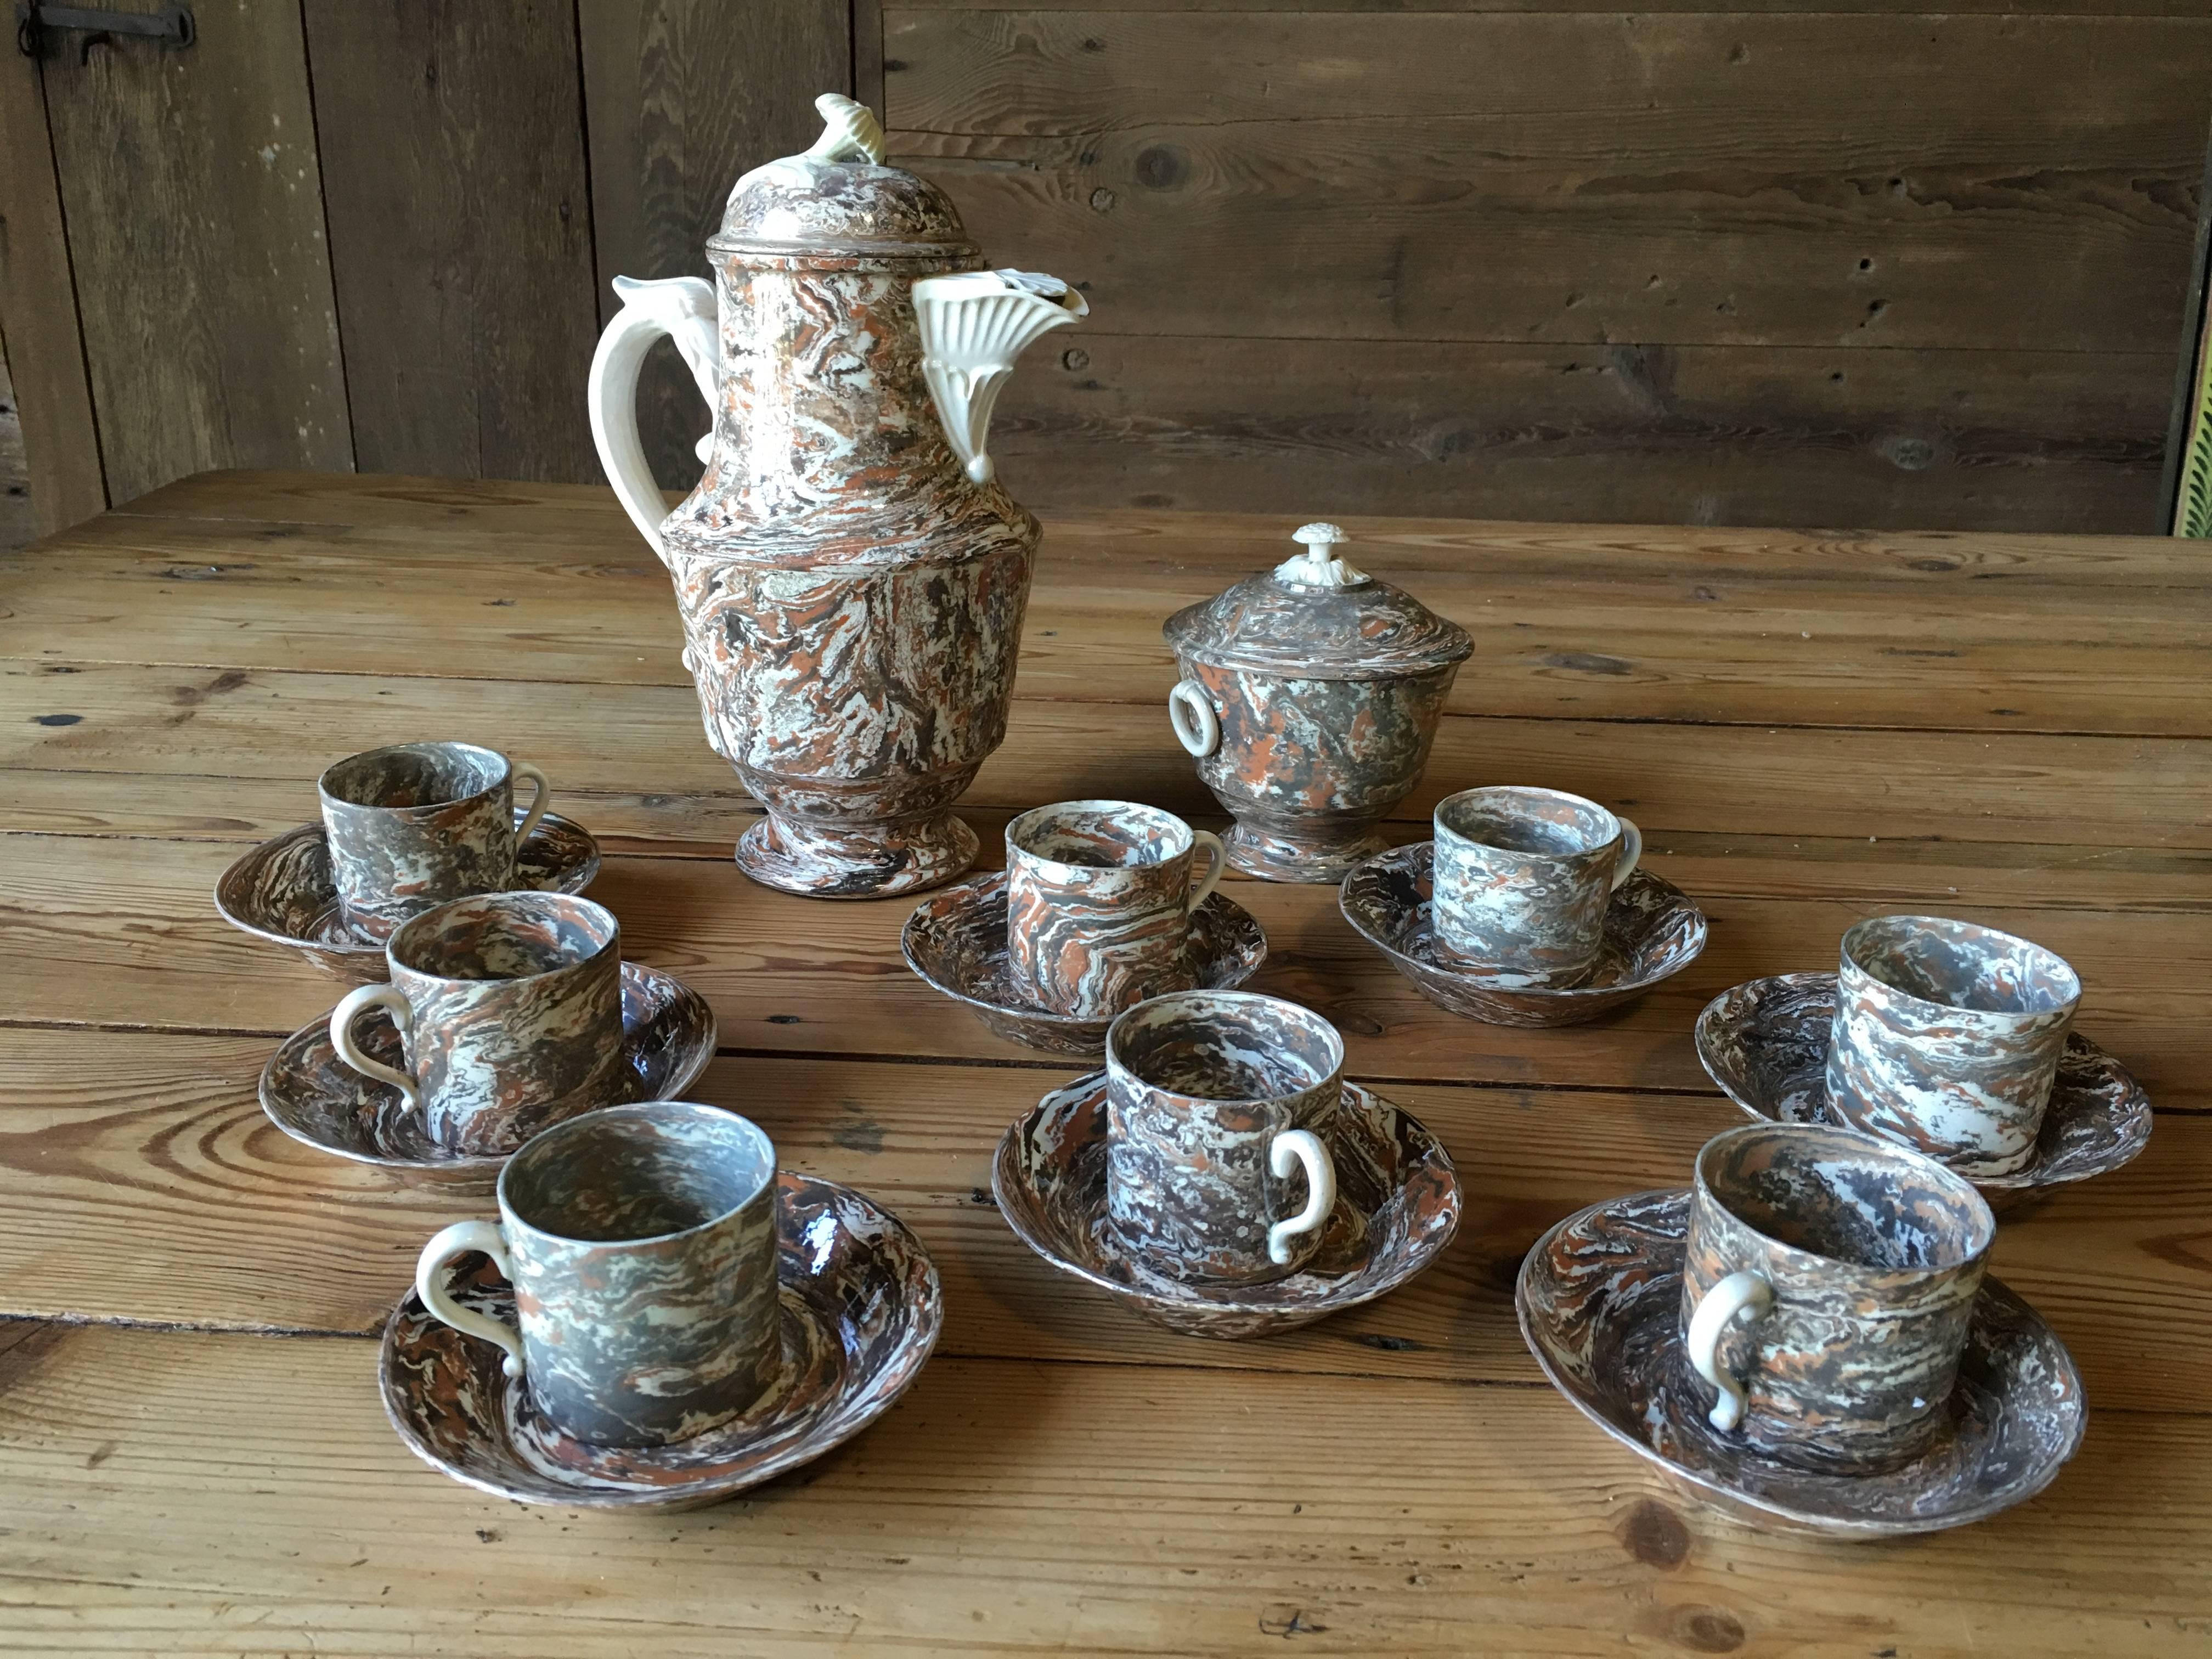 Rare Early 19th Century Demitasse Coffee Set from Apt, France 3